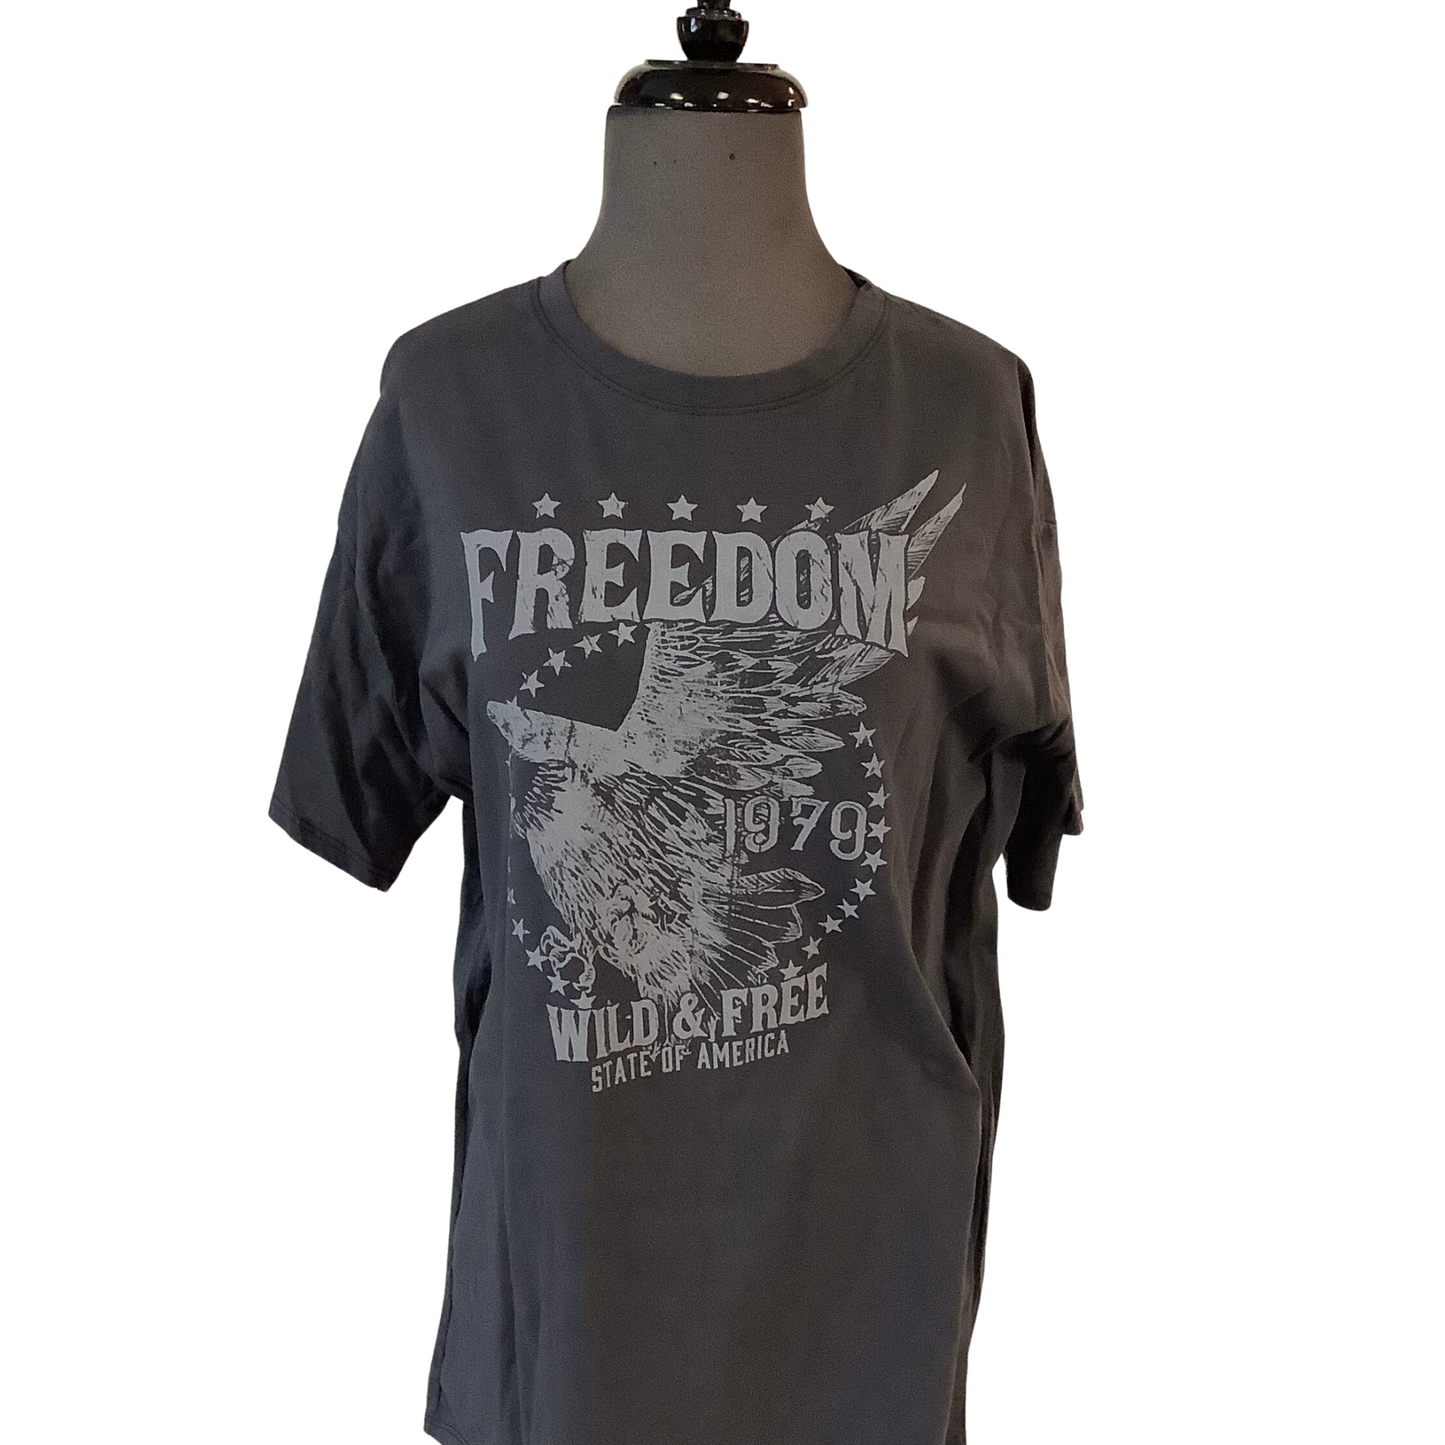 This lightweight graphic tee is perfect for expressing your love of freedom. It features the word "Freedom" in white lettering against a dark grey background, making it the perfect addition to any wardrobe.